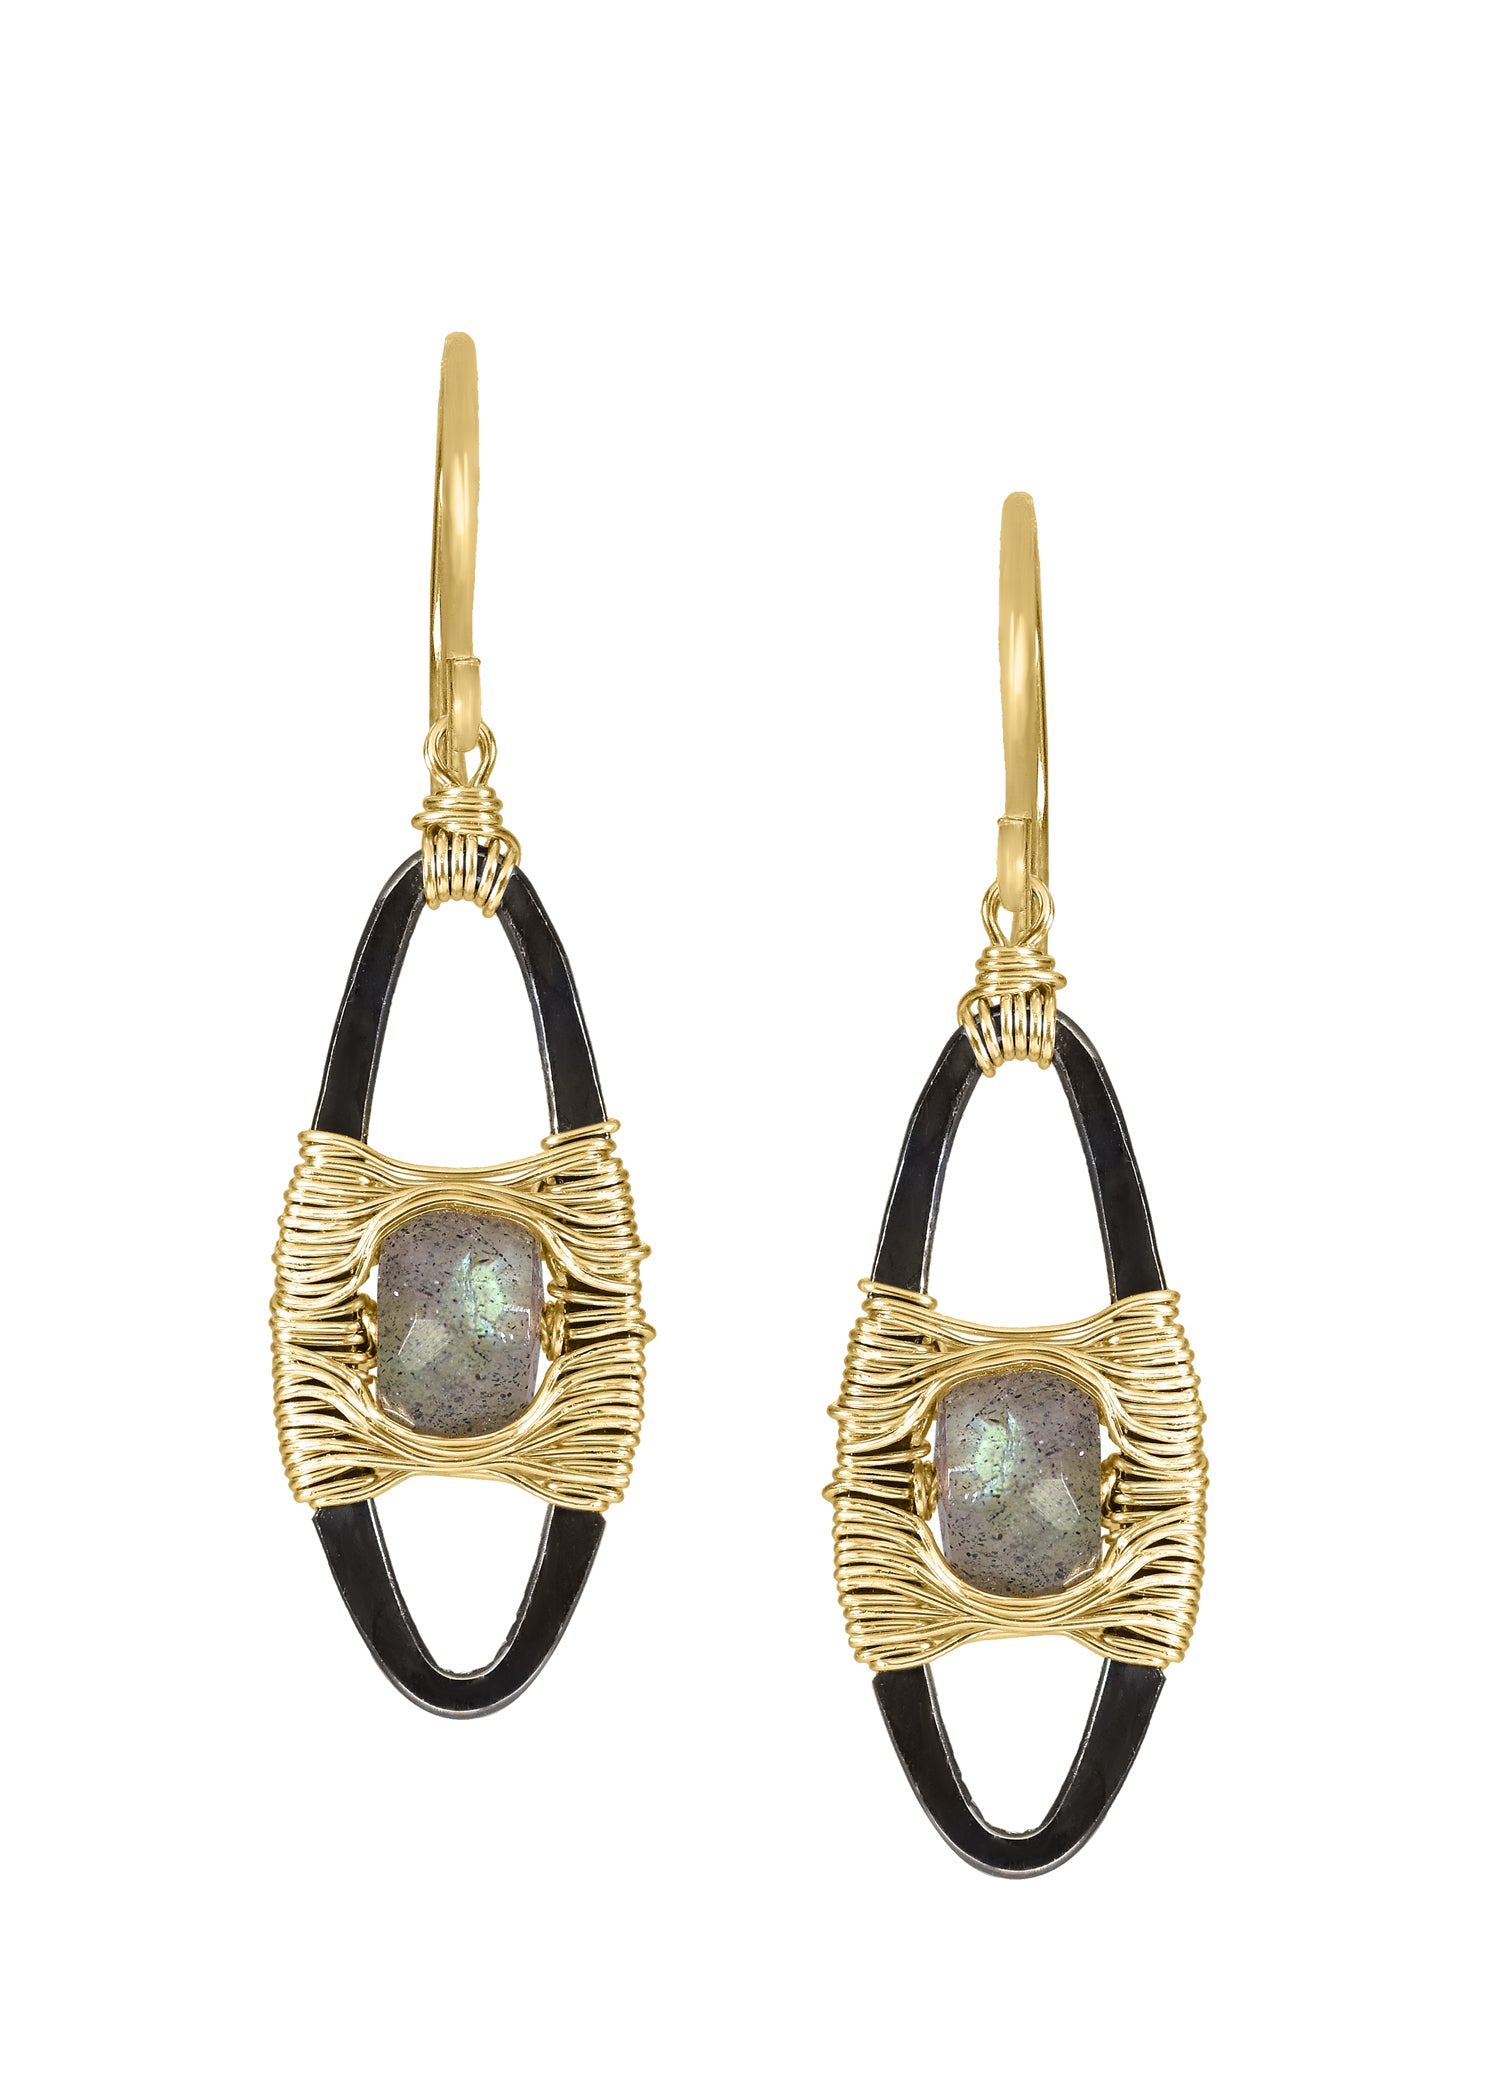 Labradorite 14k gold fill Sterling silver Mixed metal Earrings measure 1-1/4" in length (including the ear wires) and 3/8" in width at the widest point Handmade in our Los Angeles studio